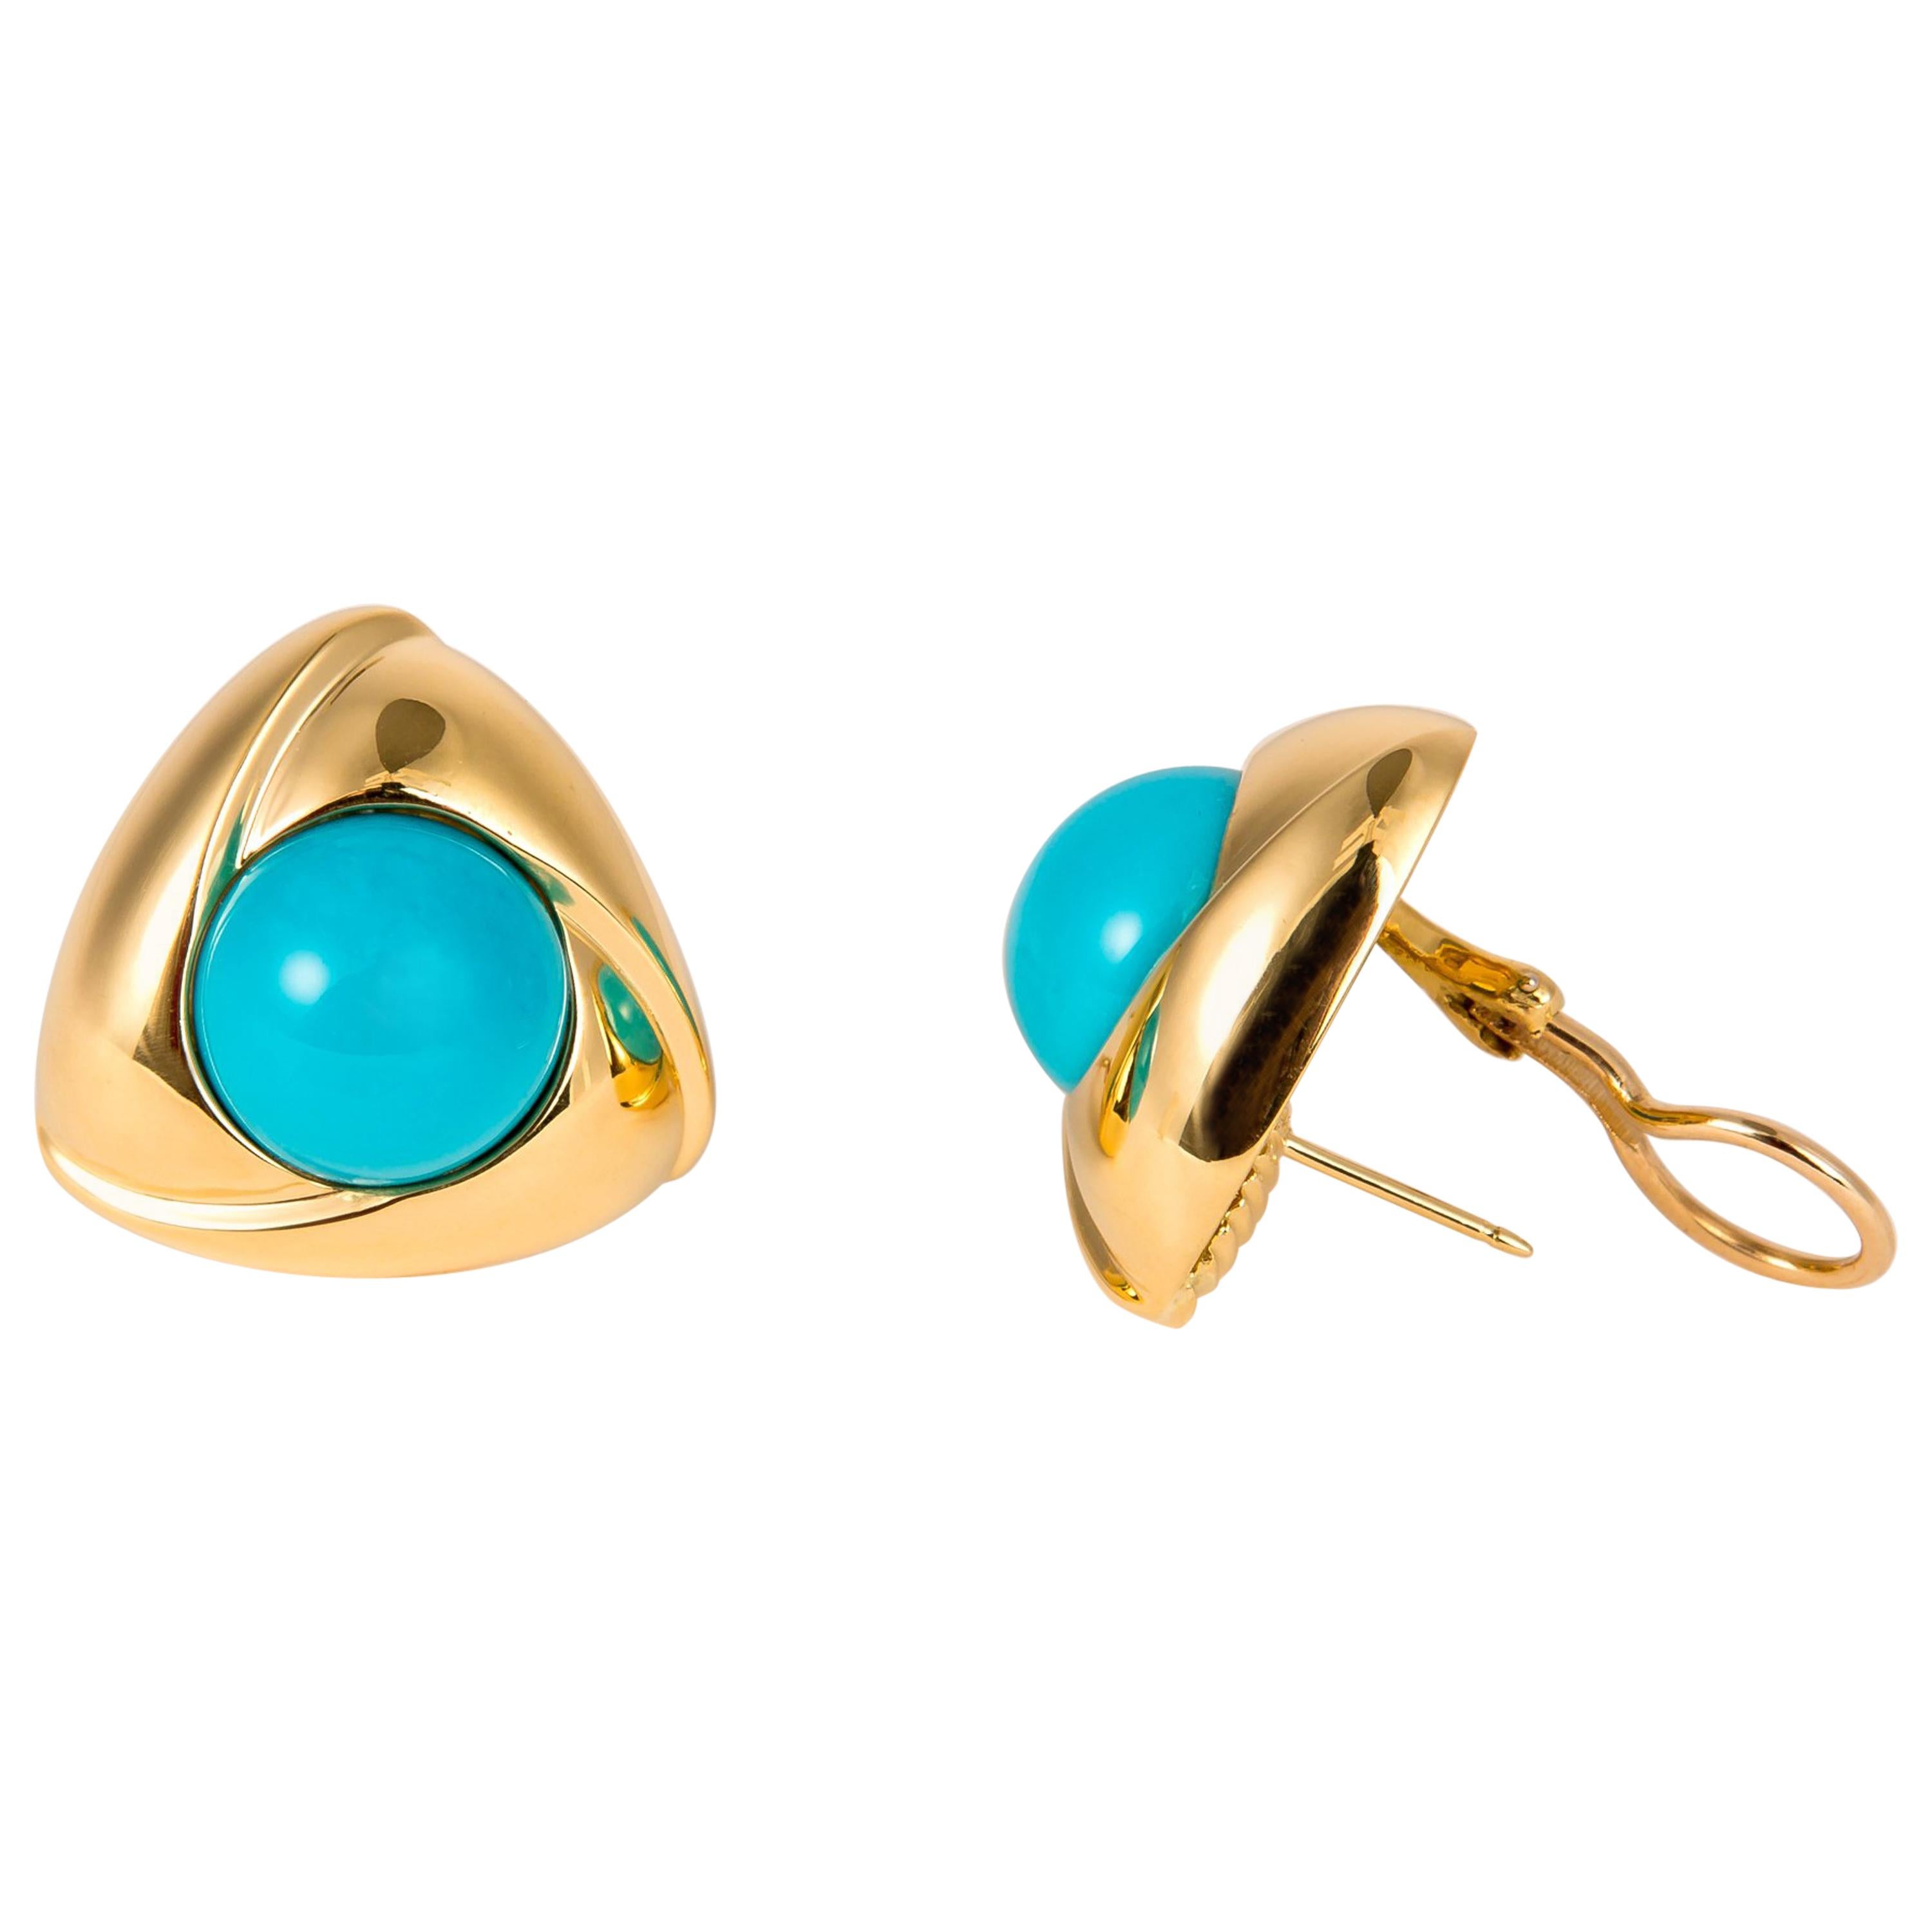 Gump's Bold Turquoise and Gold Earrings